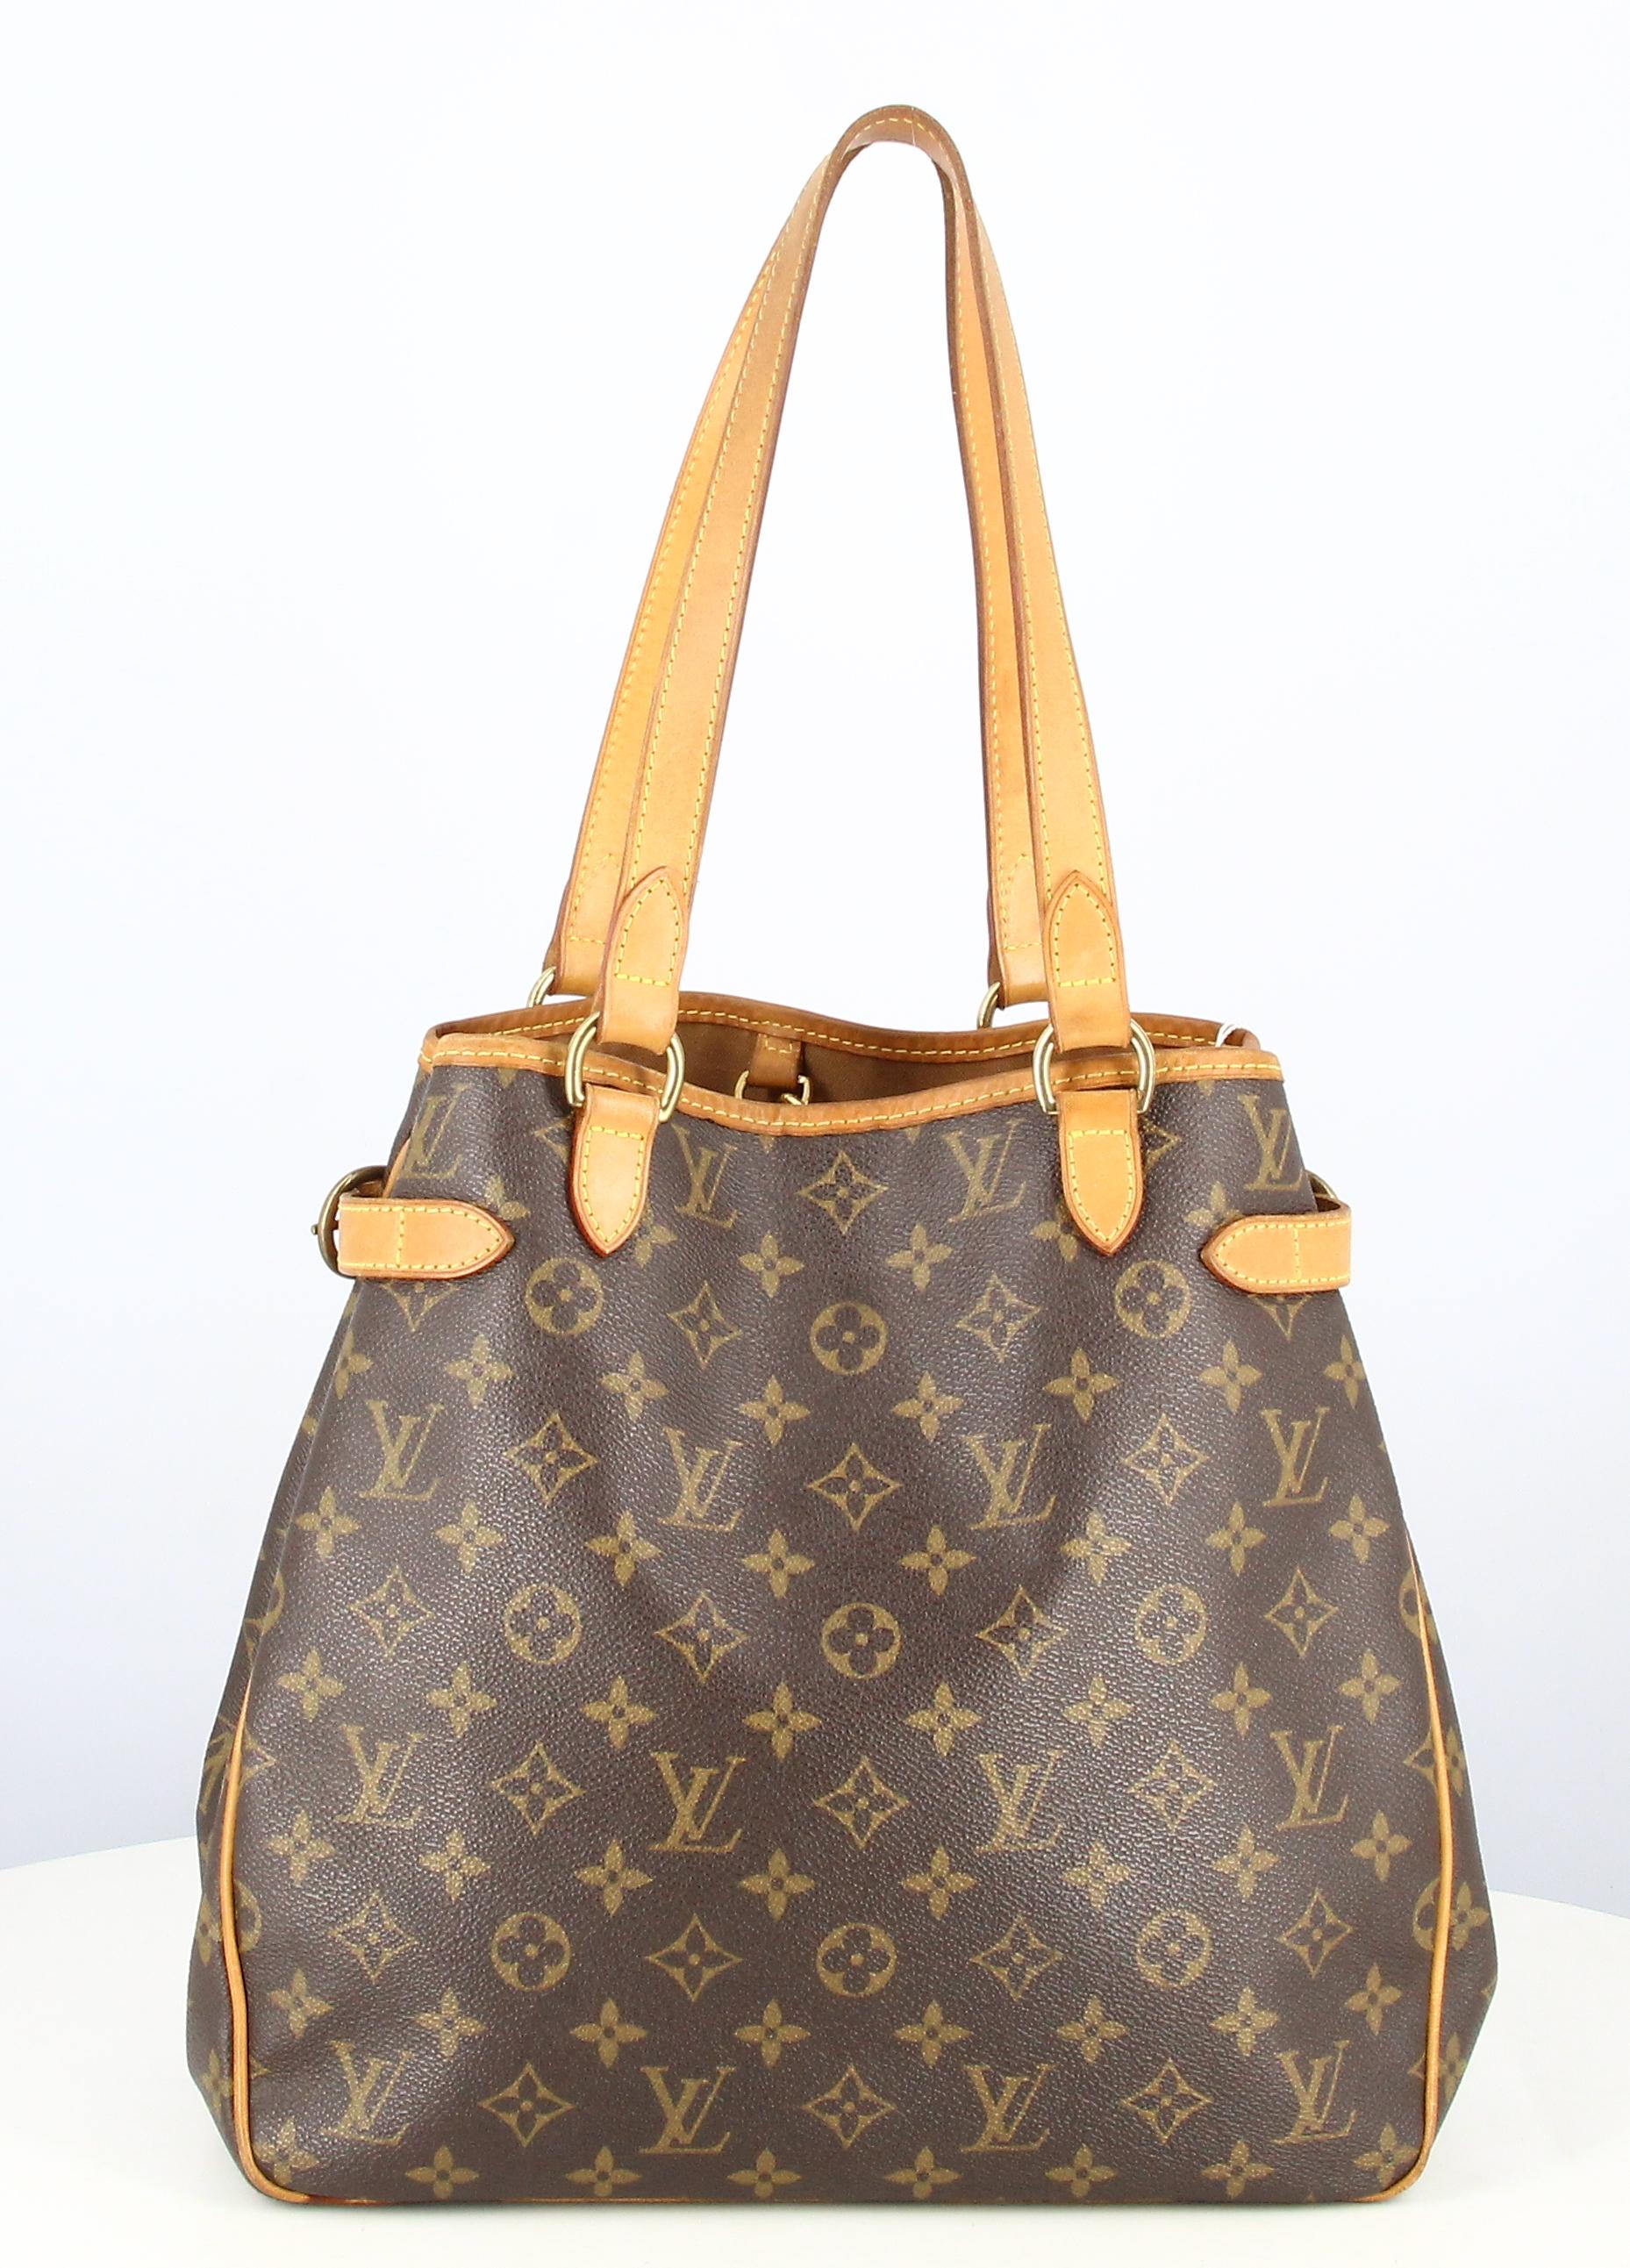 2008 Louis Vuitton Handbag Batignolles Monogram Canvas

- Very good condition. Shows very slight signs of wear over time.
- Louis Vuitton Bag
- Monogram canvas
- Two brown leather straps 
- Inside: two pockets, one of which is zipped